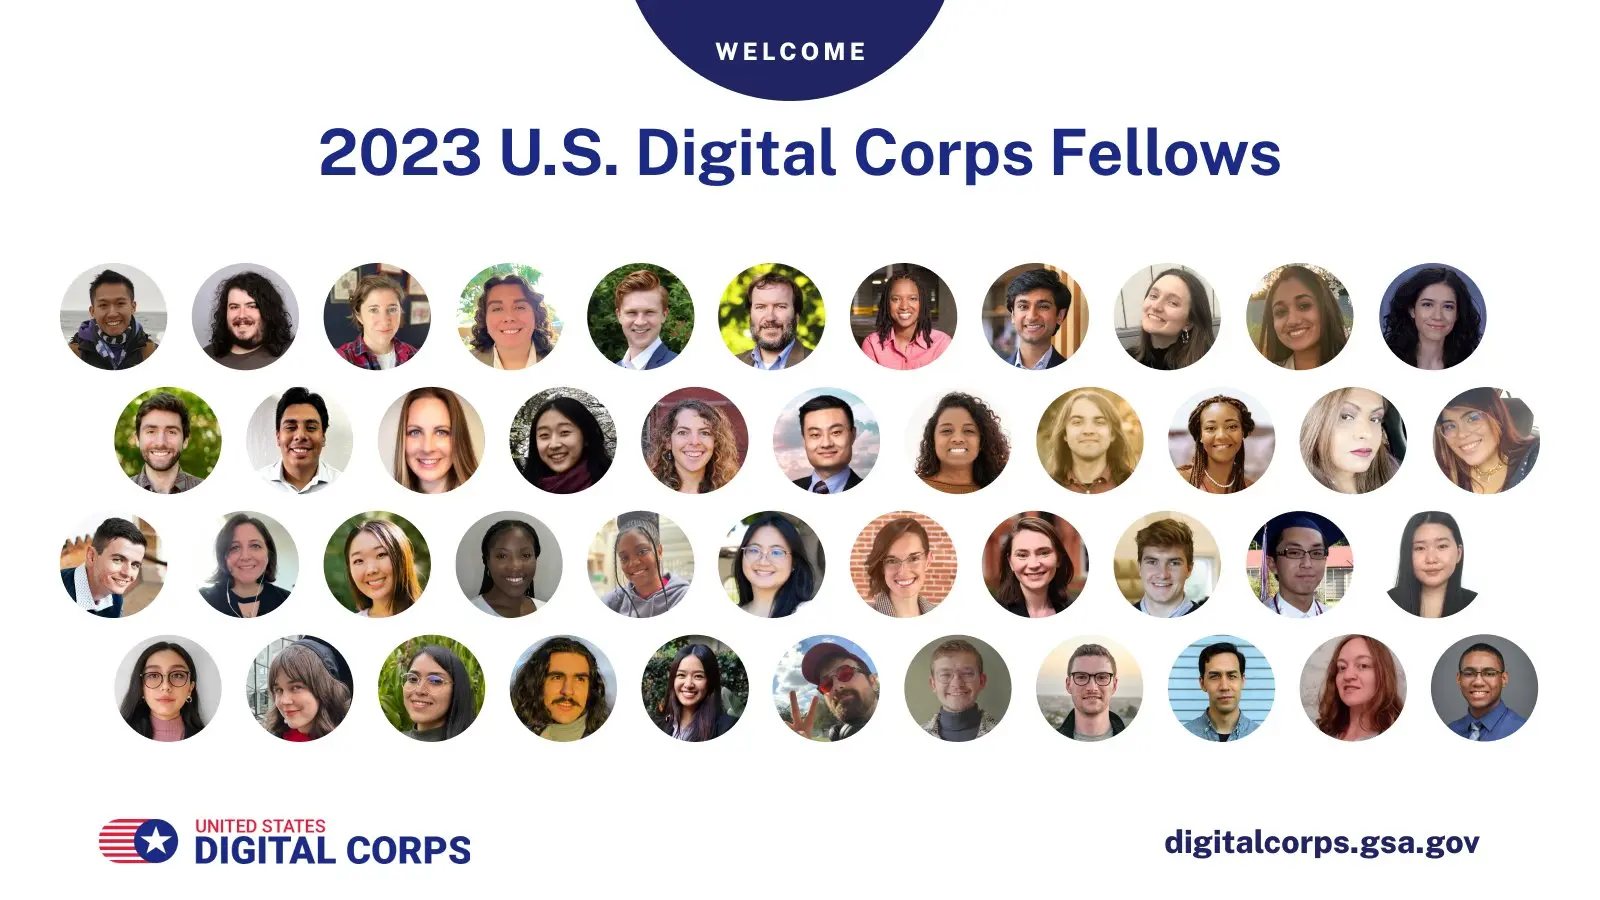 GSA welcomes second annual cohort of U.S. Digital Corps Fellows